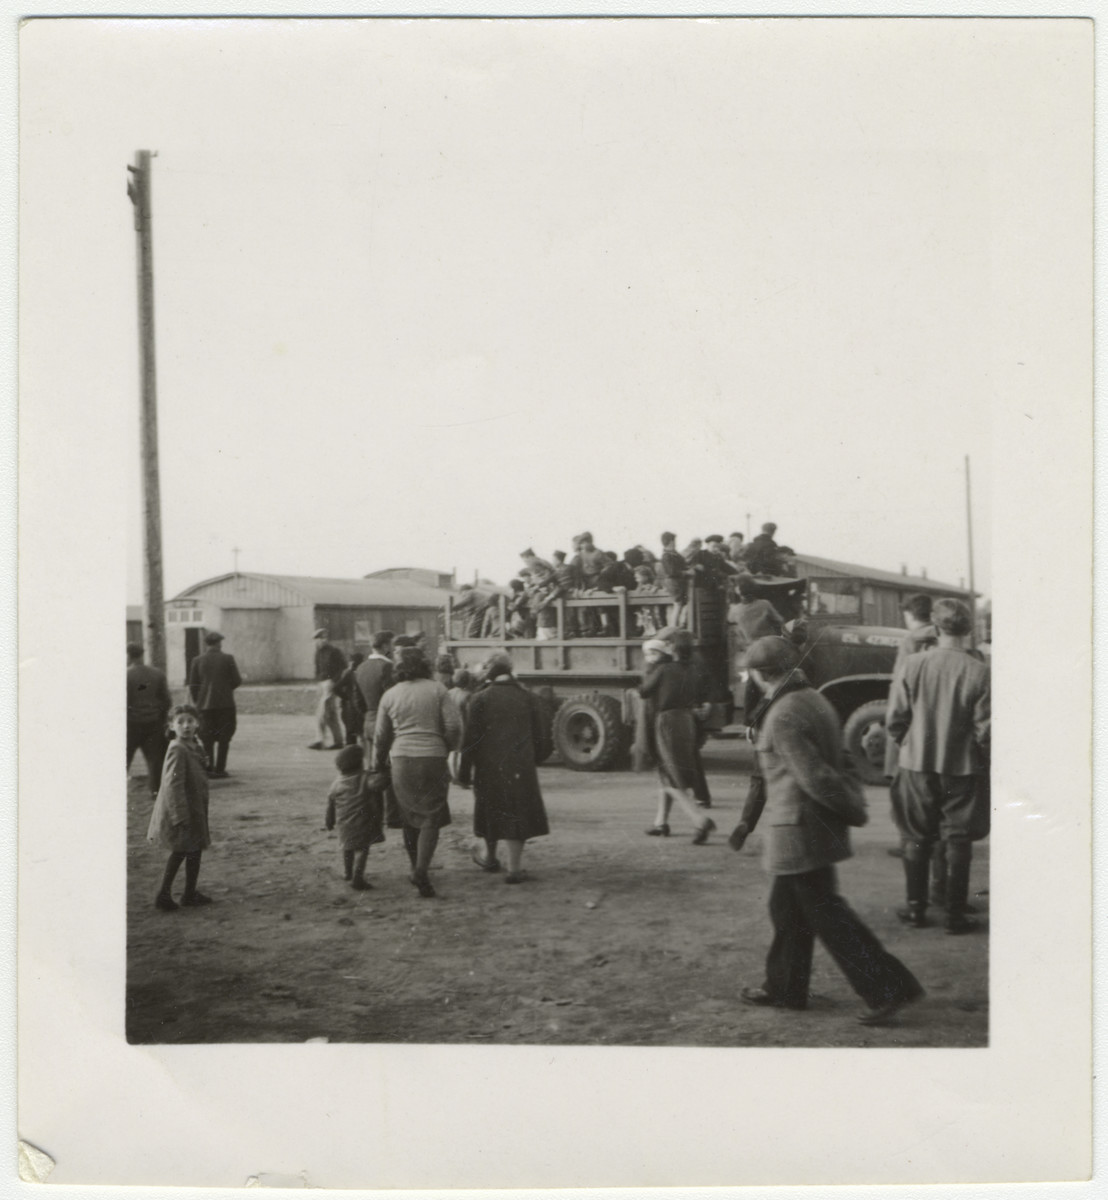 A group of children from a displaced persons crowds onto a truck.

David Marcus' original caption reads: "Barefooted children get a ride."